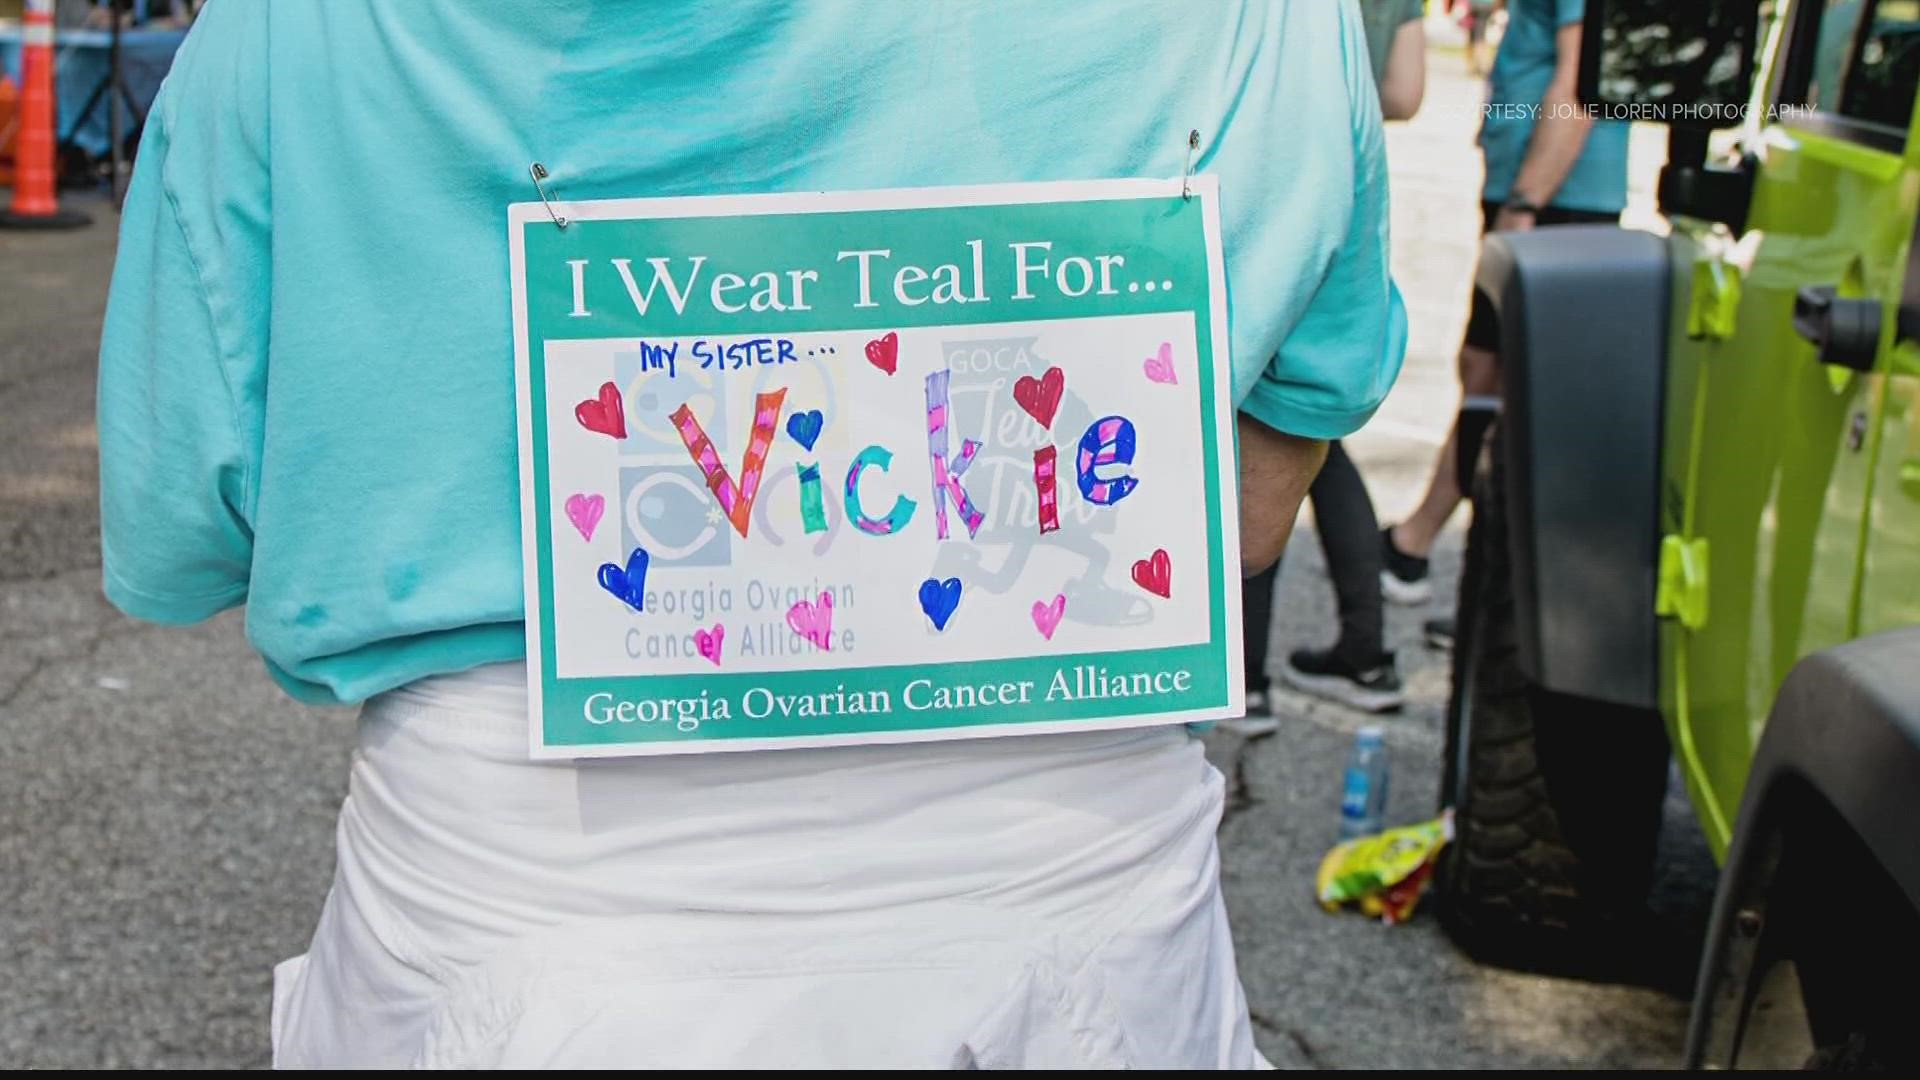 Advocates urge women to check for the signs because the disease could easily go unnoticed.